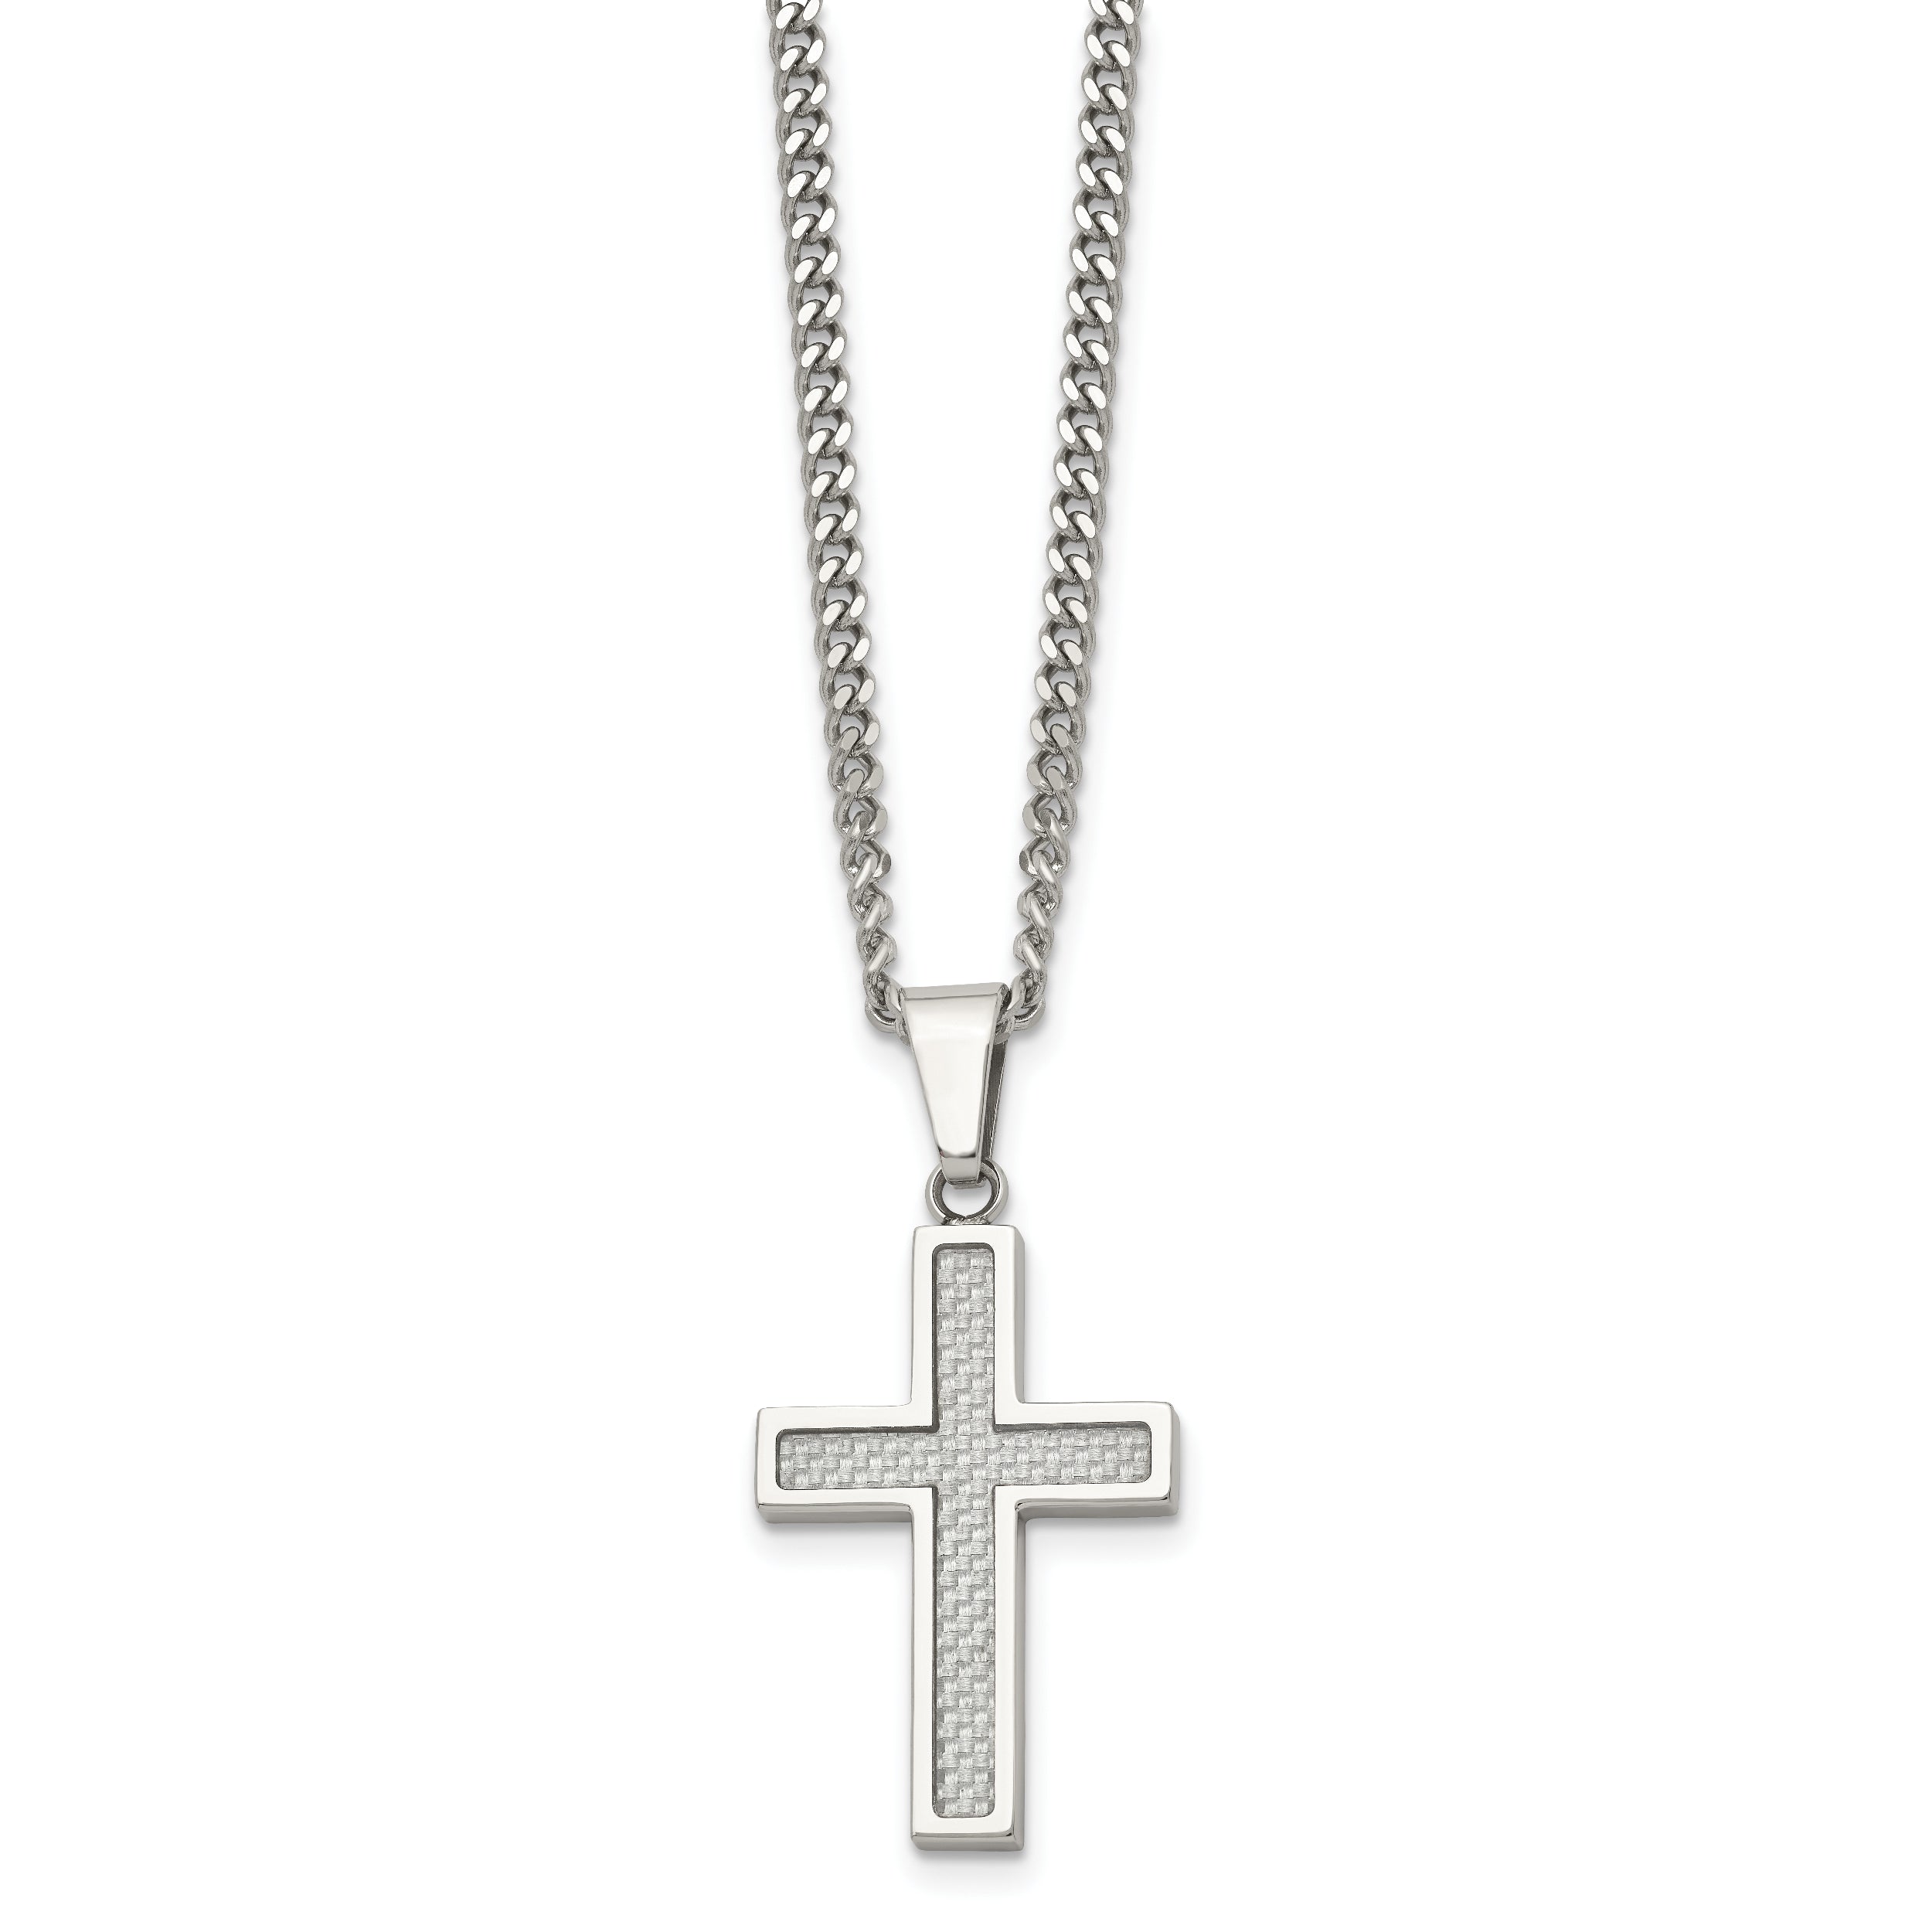 Chisel Stainless Steel Polished with Grey Carbon Fiber Inlay Small Cross Pendant on a 20 inch Curb Chain Necklace